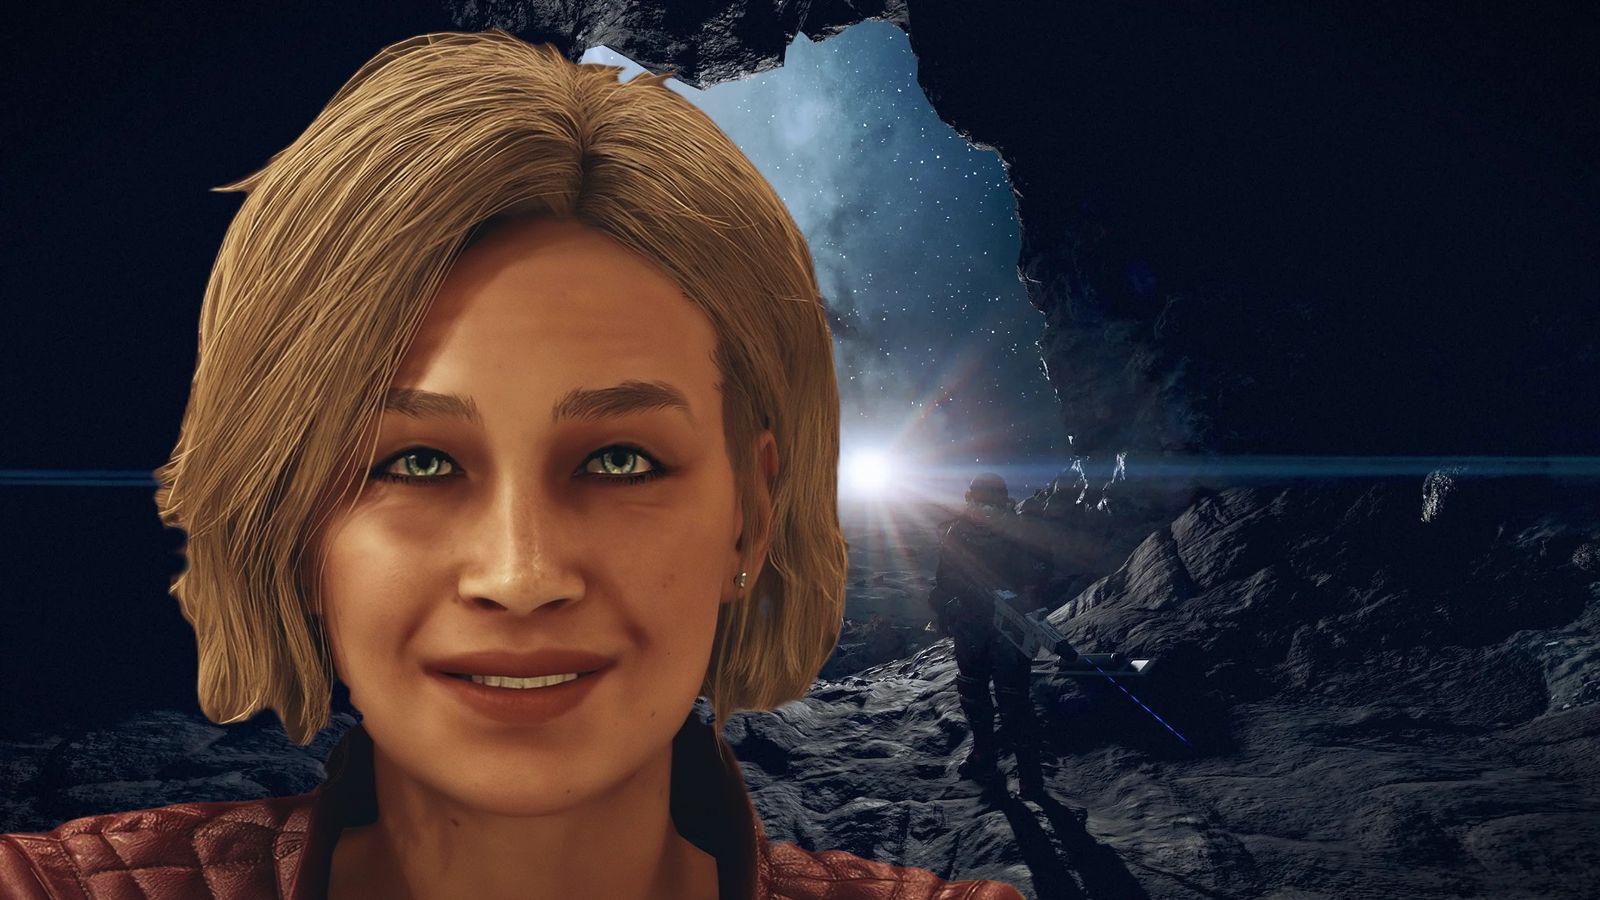 Starfield - blonde woman's face pasted over a Starfield screenshot of an astronaut looking at a star